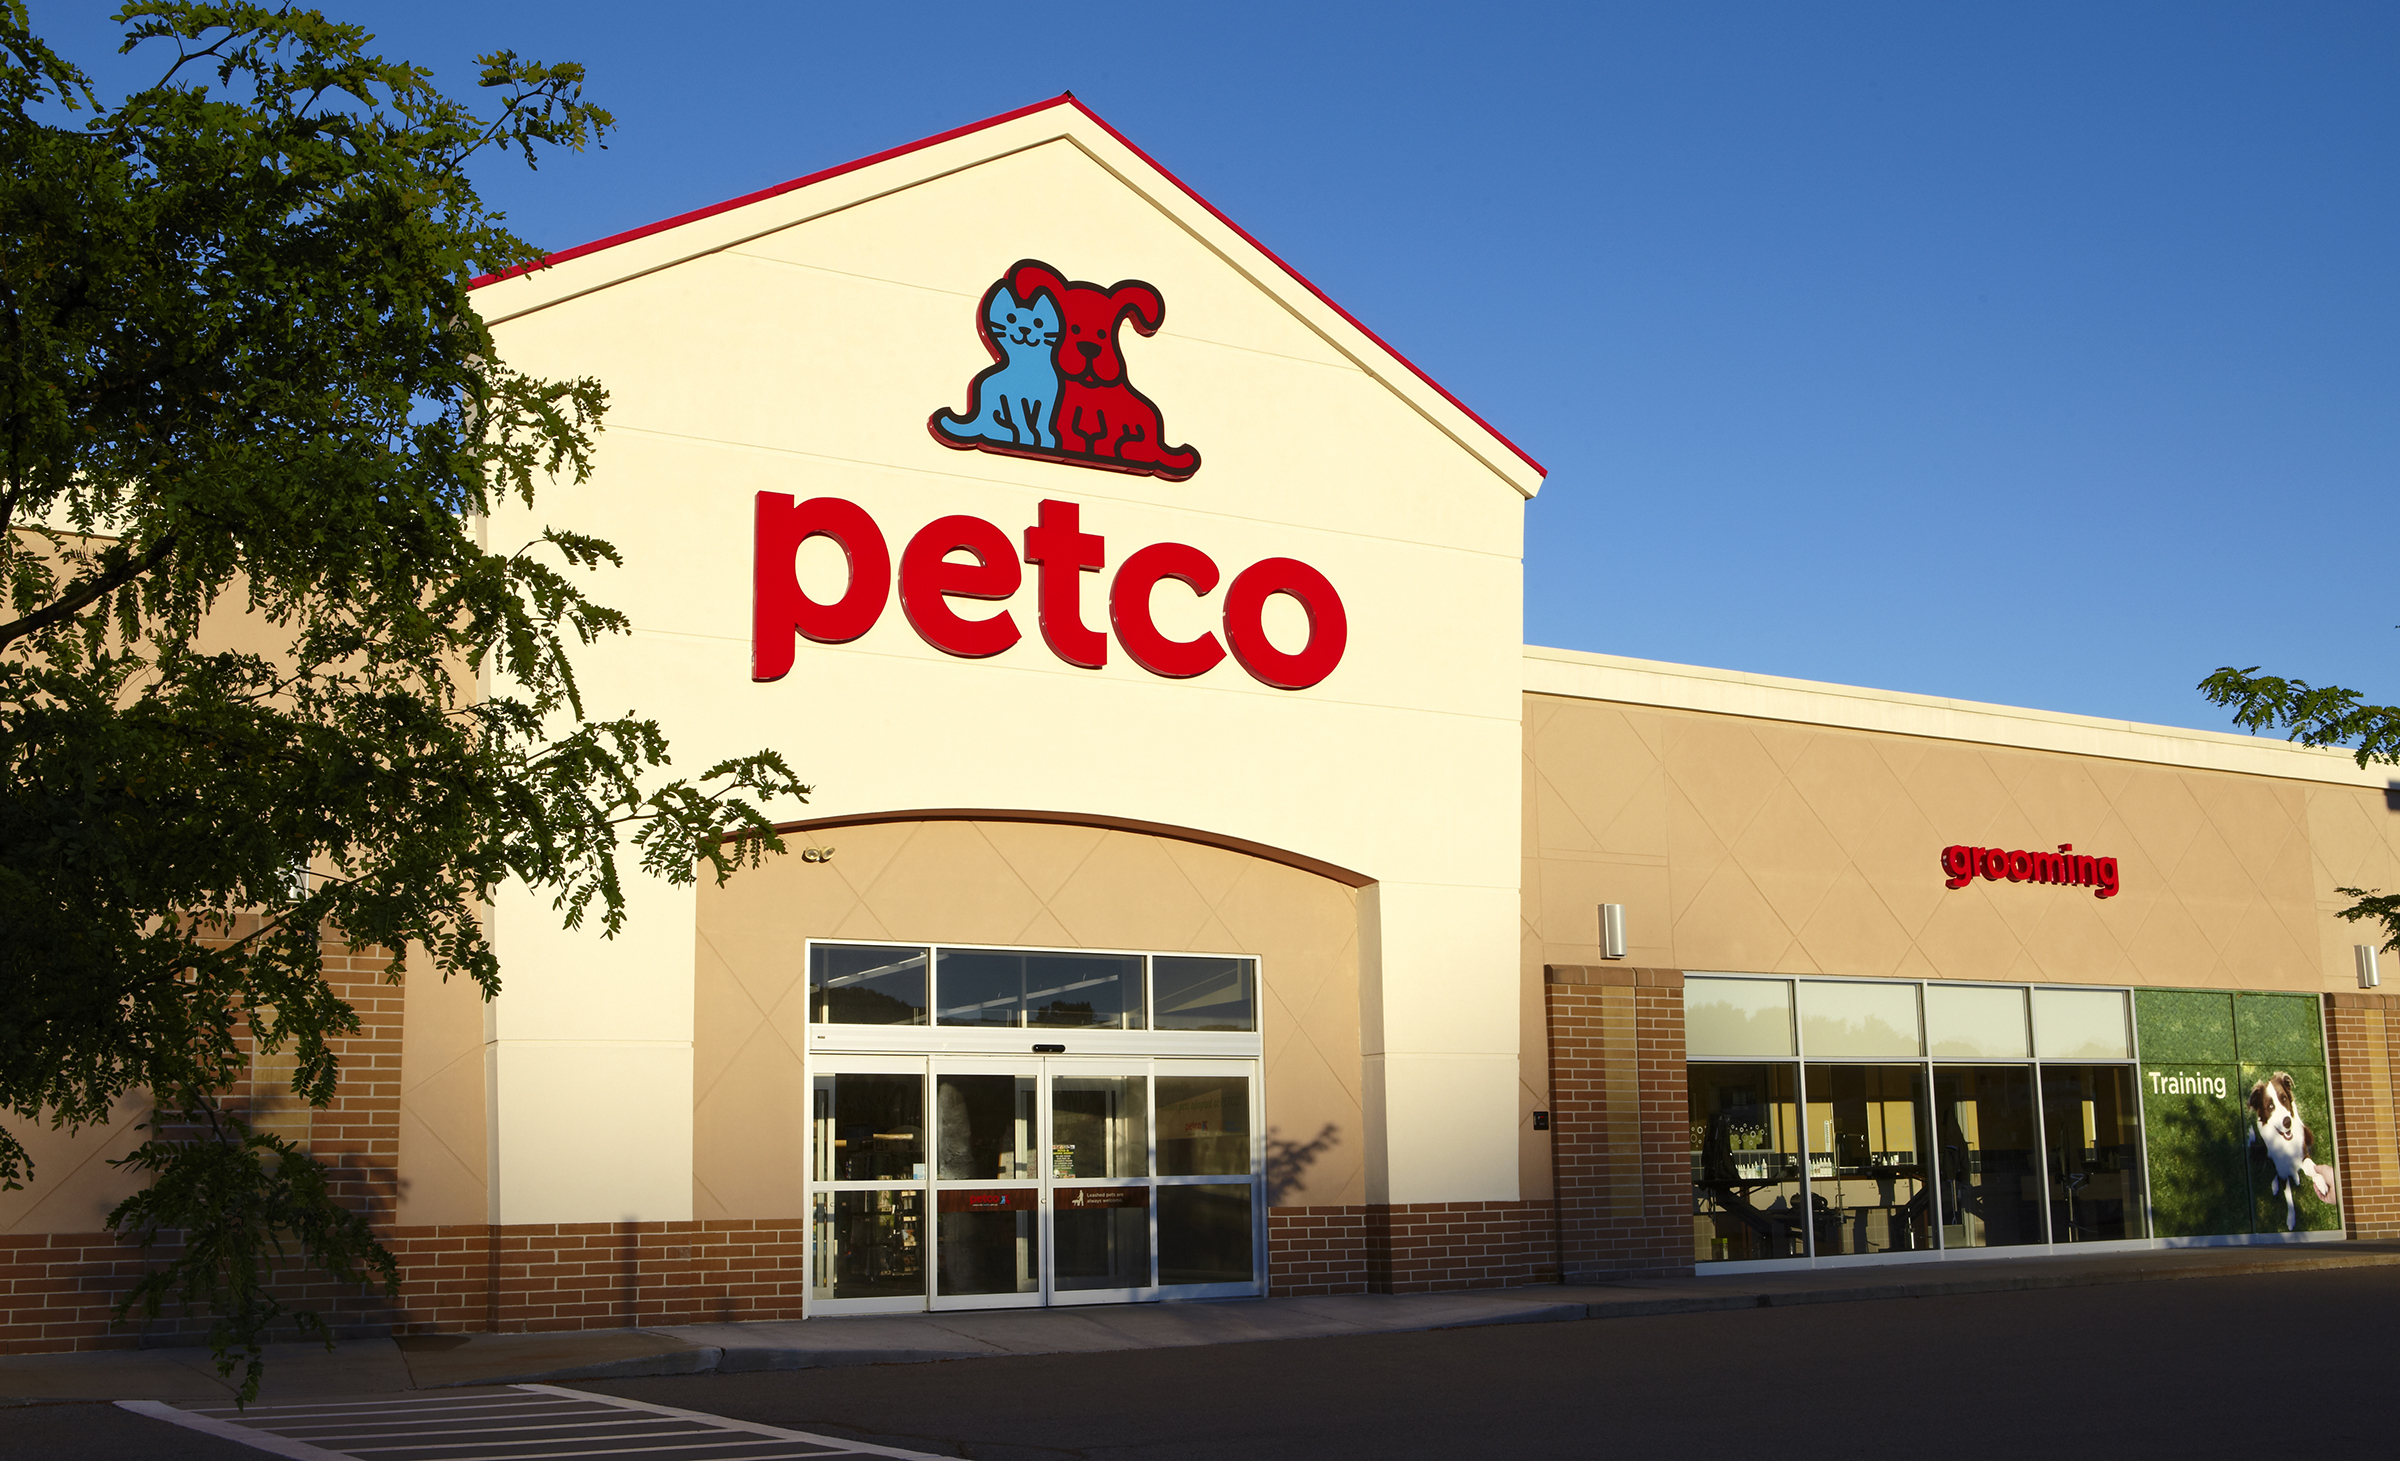 Image result for petco images